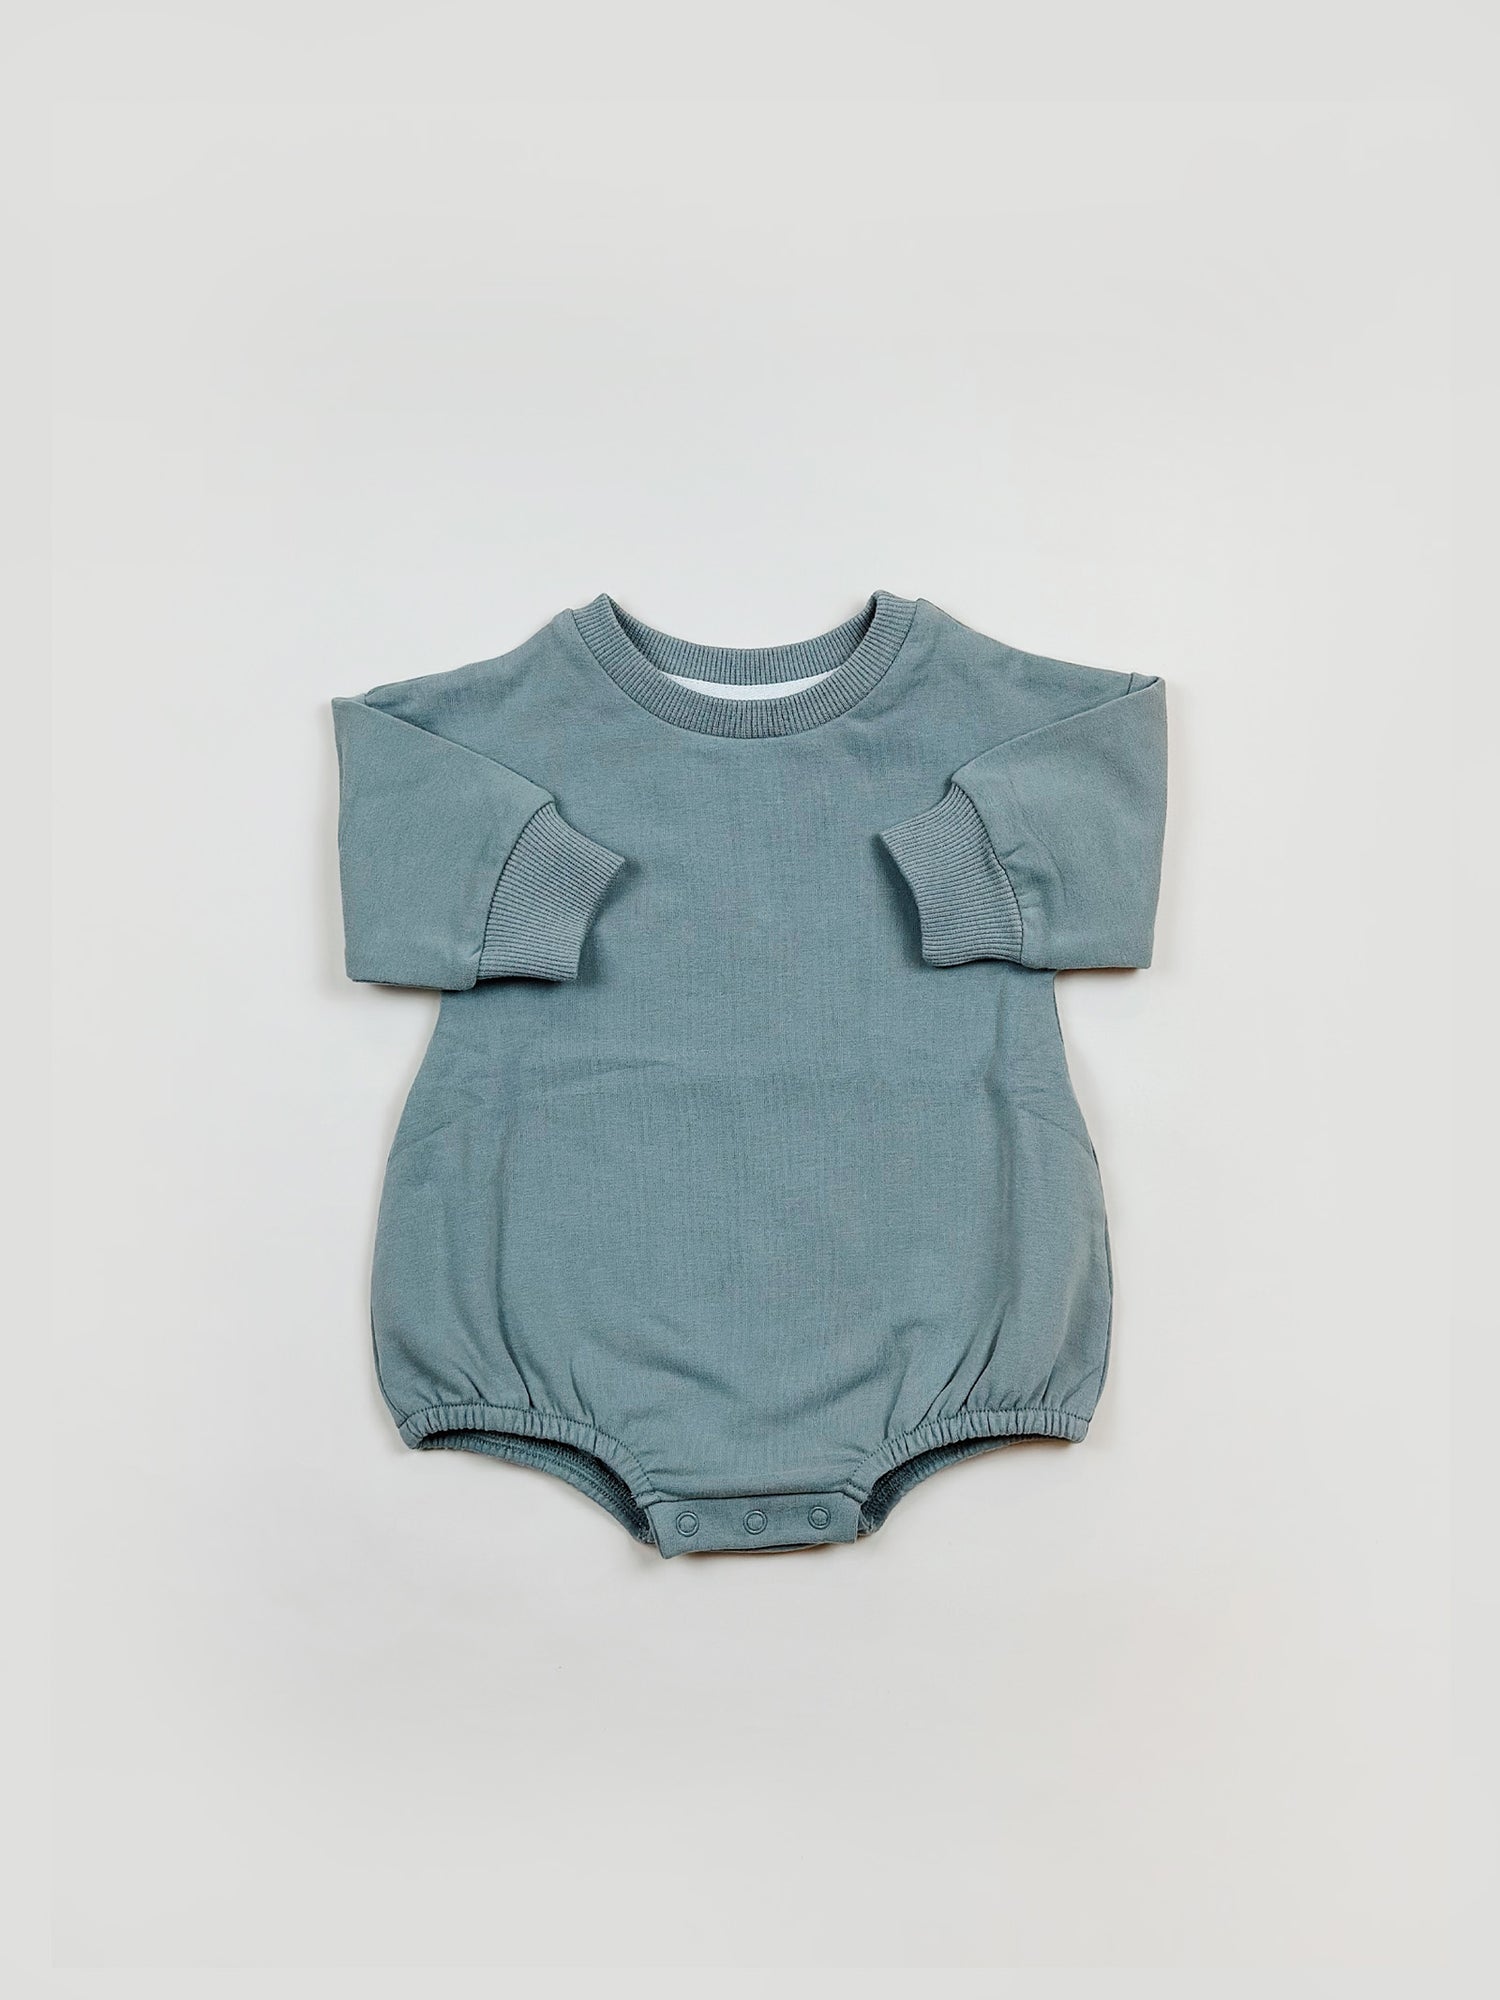 Mint French Terry Onesie in Organic Cotton